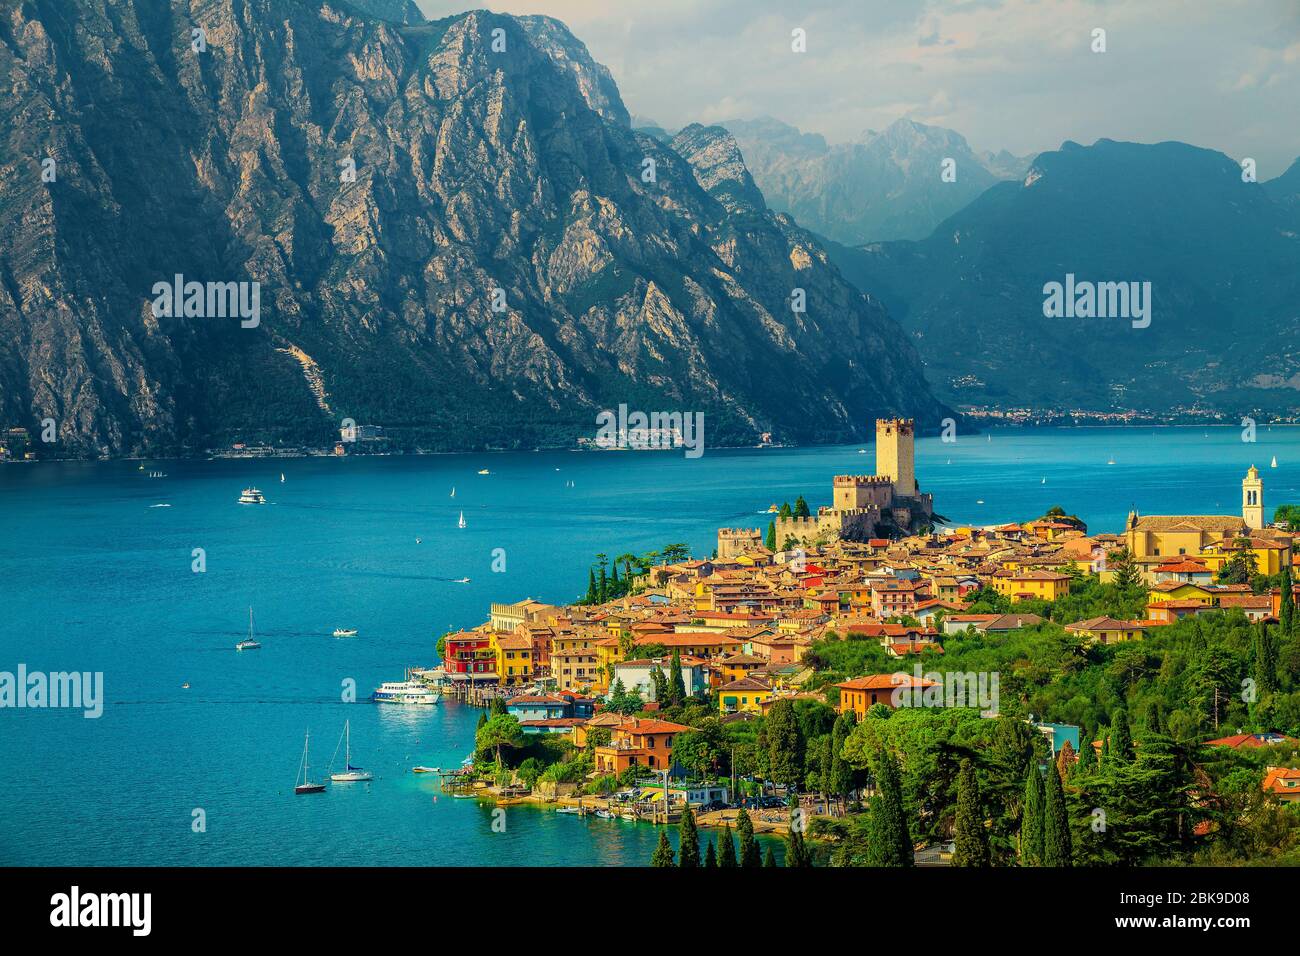 Fantastic summer vacation place, beautiful Malcesine mediterranean cityscape with colorful buildings view from the hill, lake Garda, Italy, Europe Stock Photo